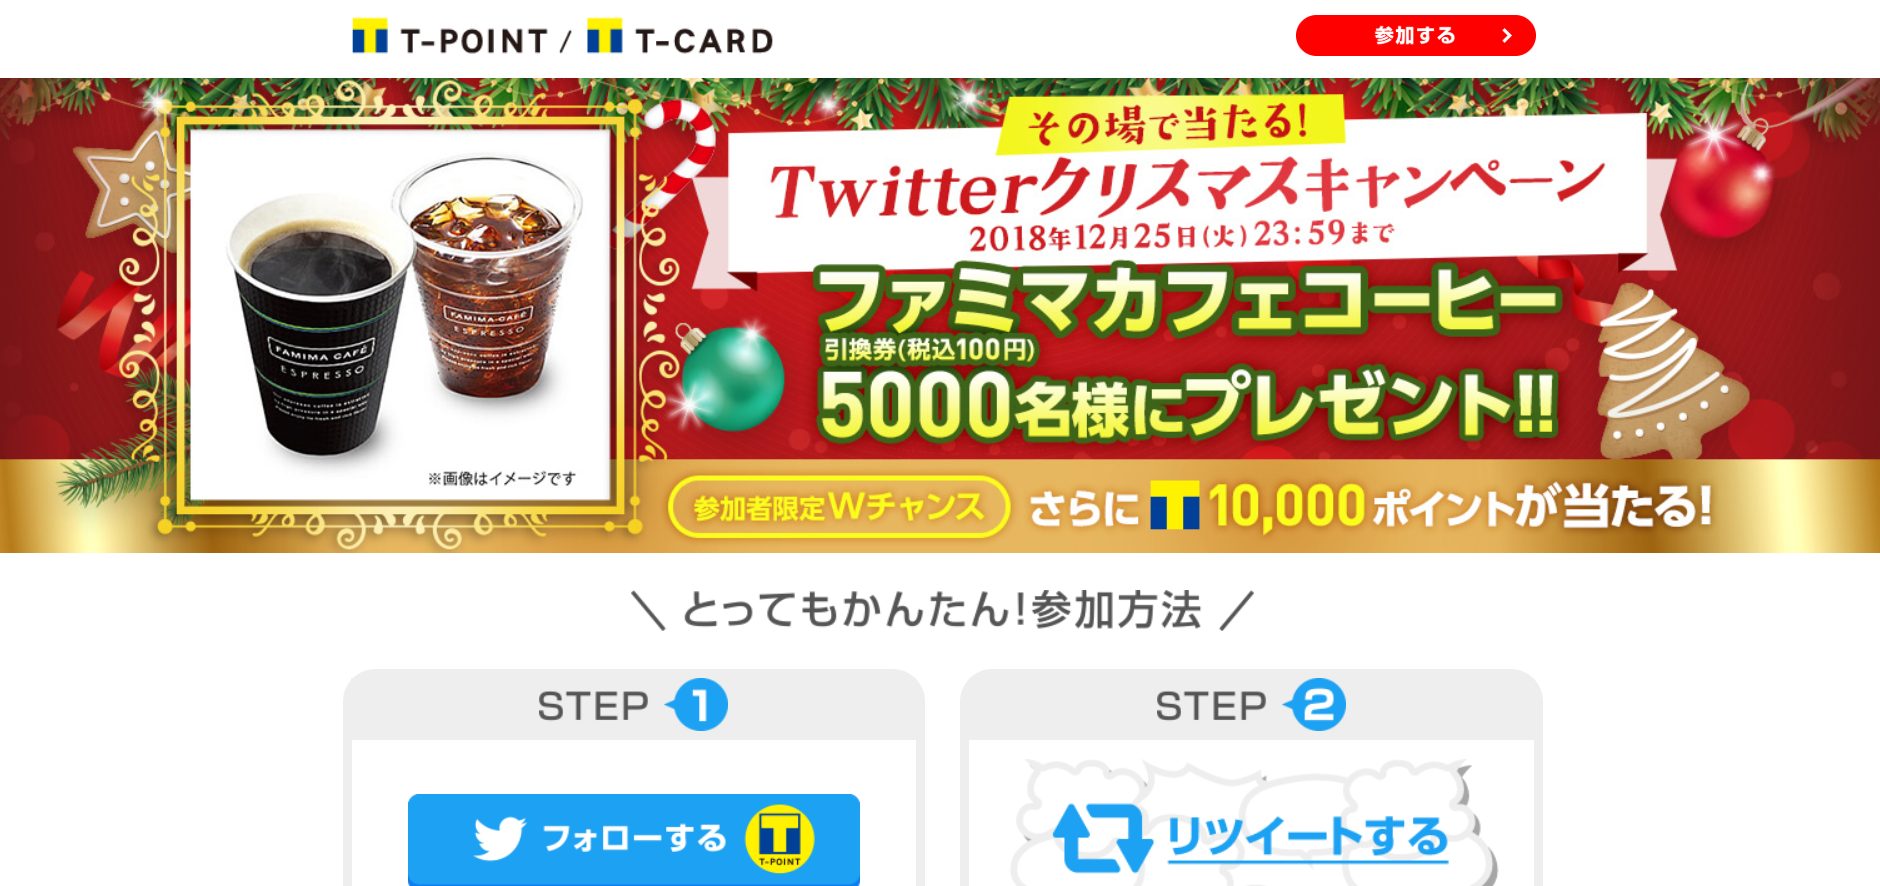 twitter-campaign-tpoint